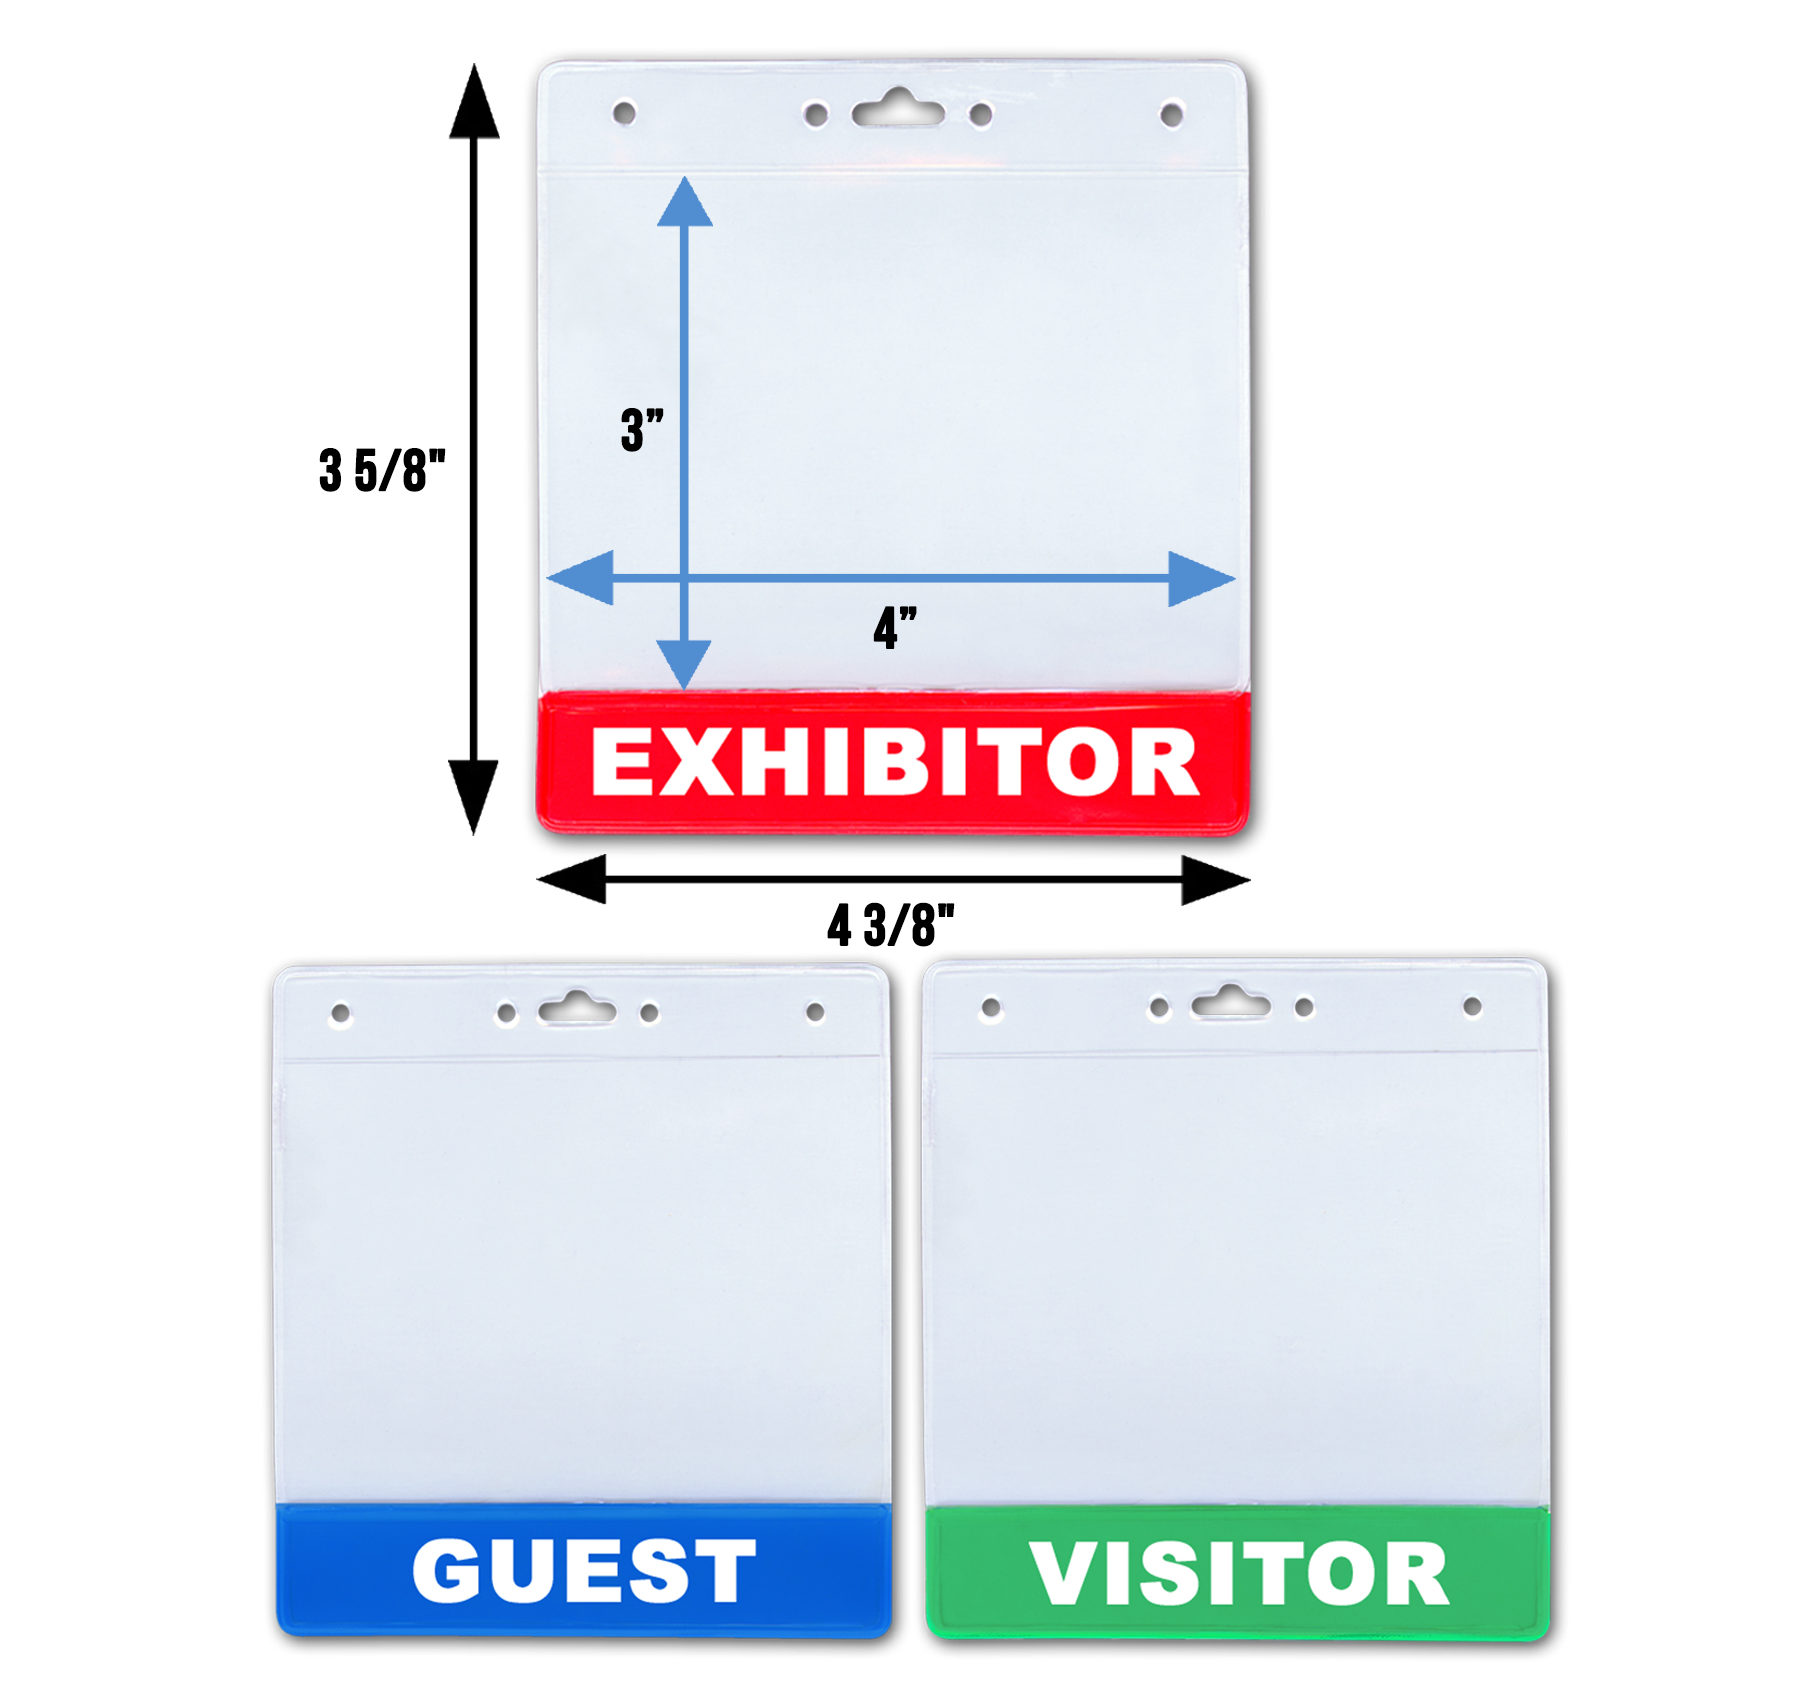 Premium Vinyl Badge Holders for Exhibitors, Guests & Visitors: Pre-Printed & Clear - Fits 4”(W) x 3”(L) Cards